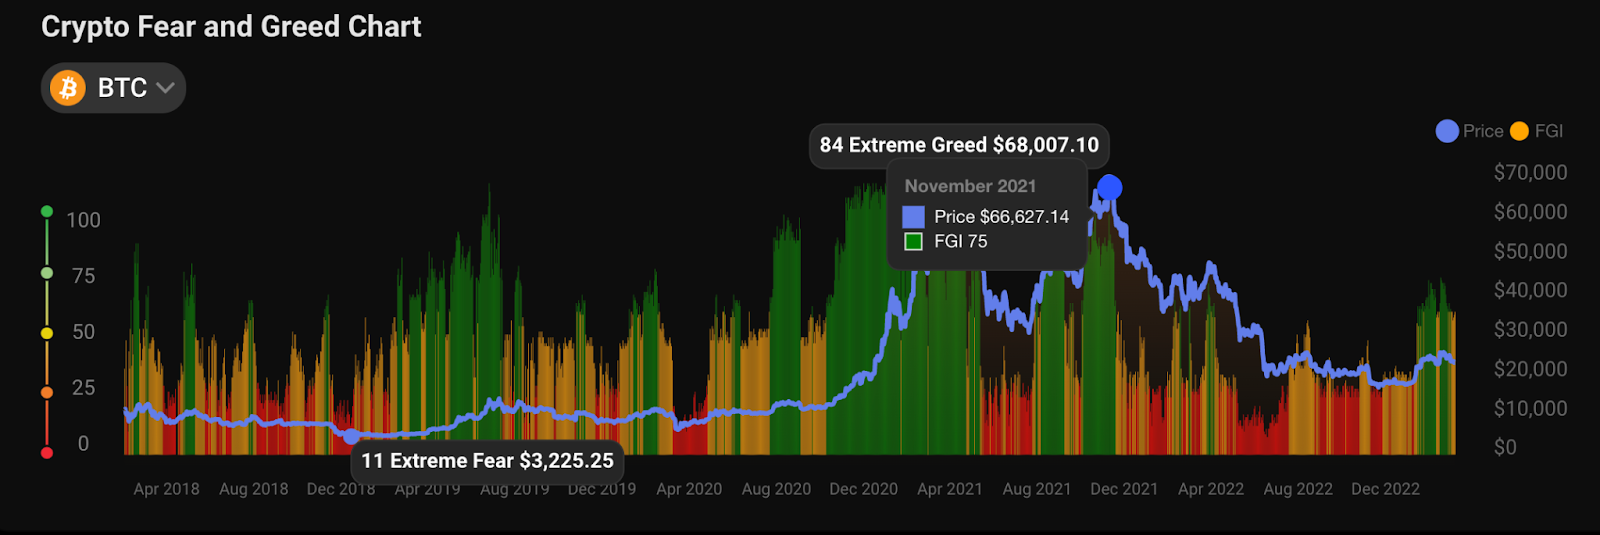 Fear and Greed Chart Bitcoin